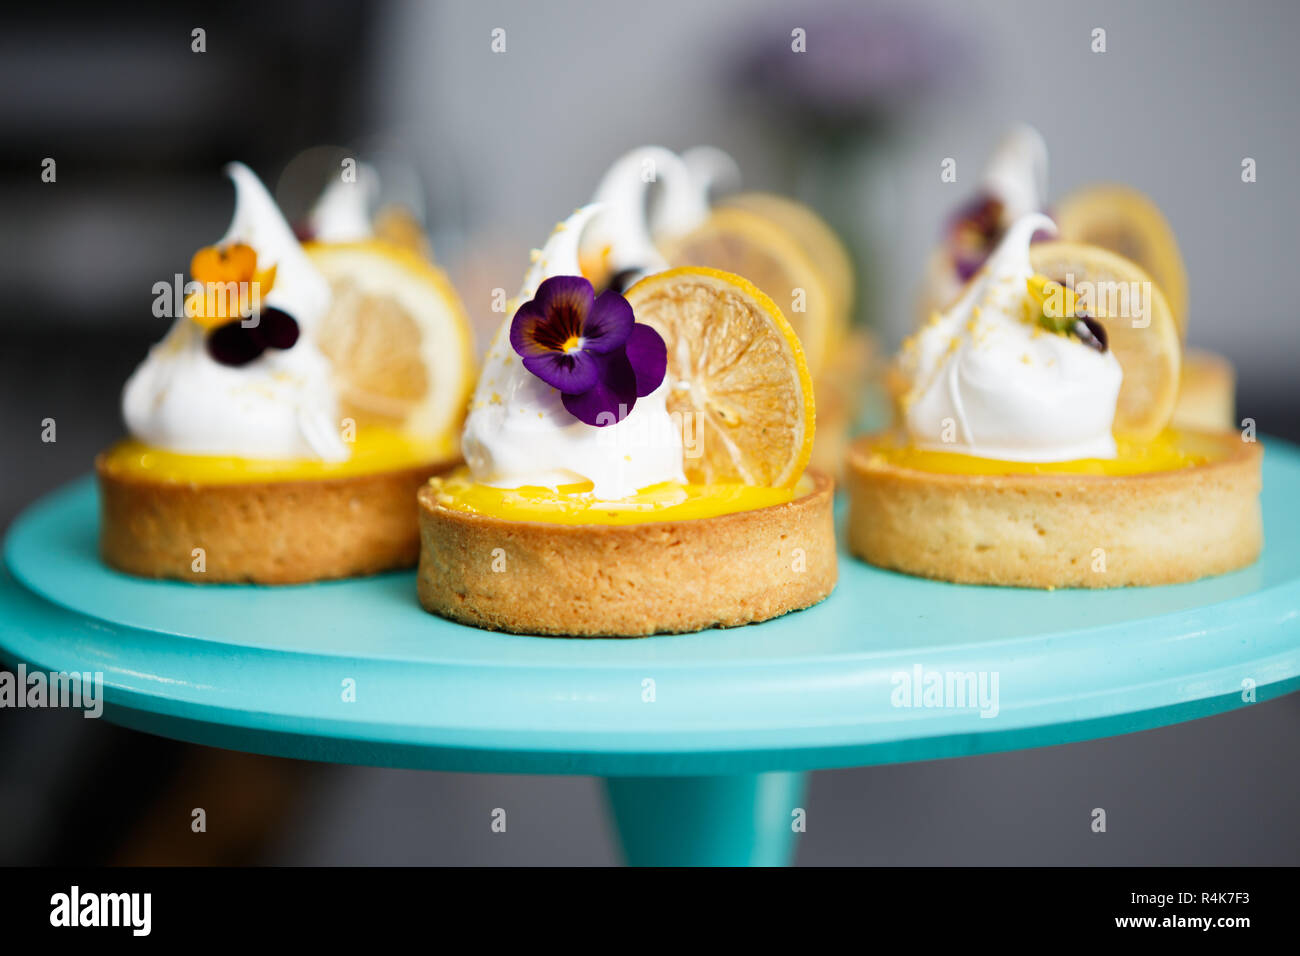 Tasty little creamy cupcakes with lemon slice and white cream served on plate in Italian restaurant. Delicious little cakes for dessert in bakery cafe Stock Photo